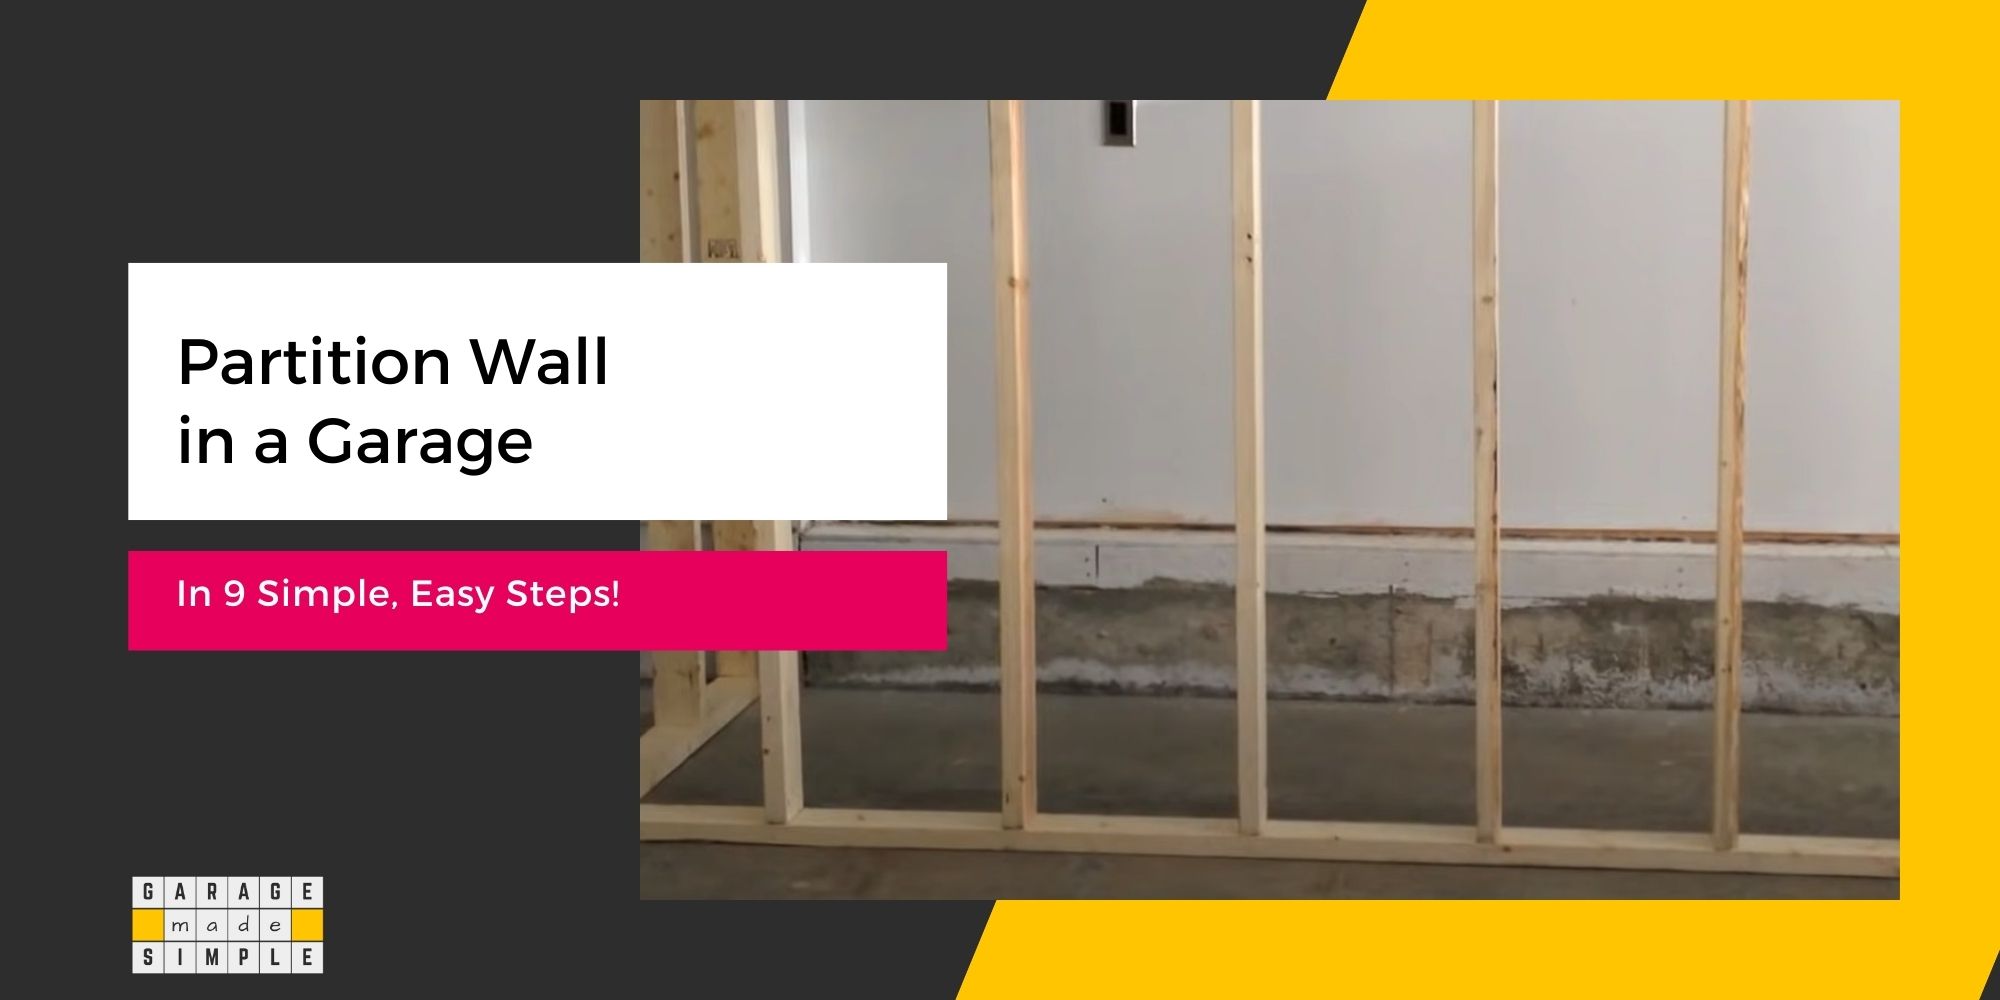 How to Make a Partition Wall in Garage? (9 Simple, Easy Steps!)